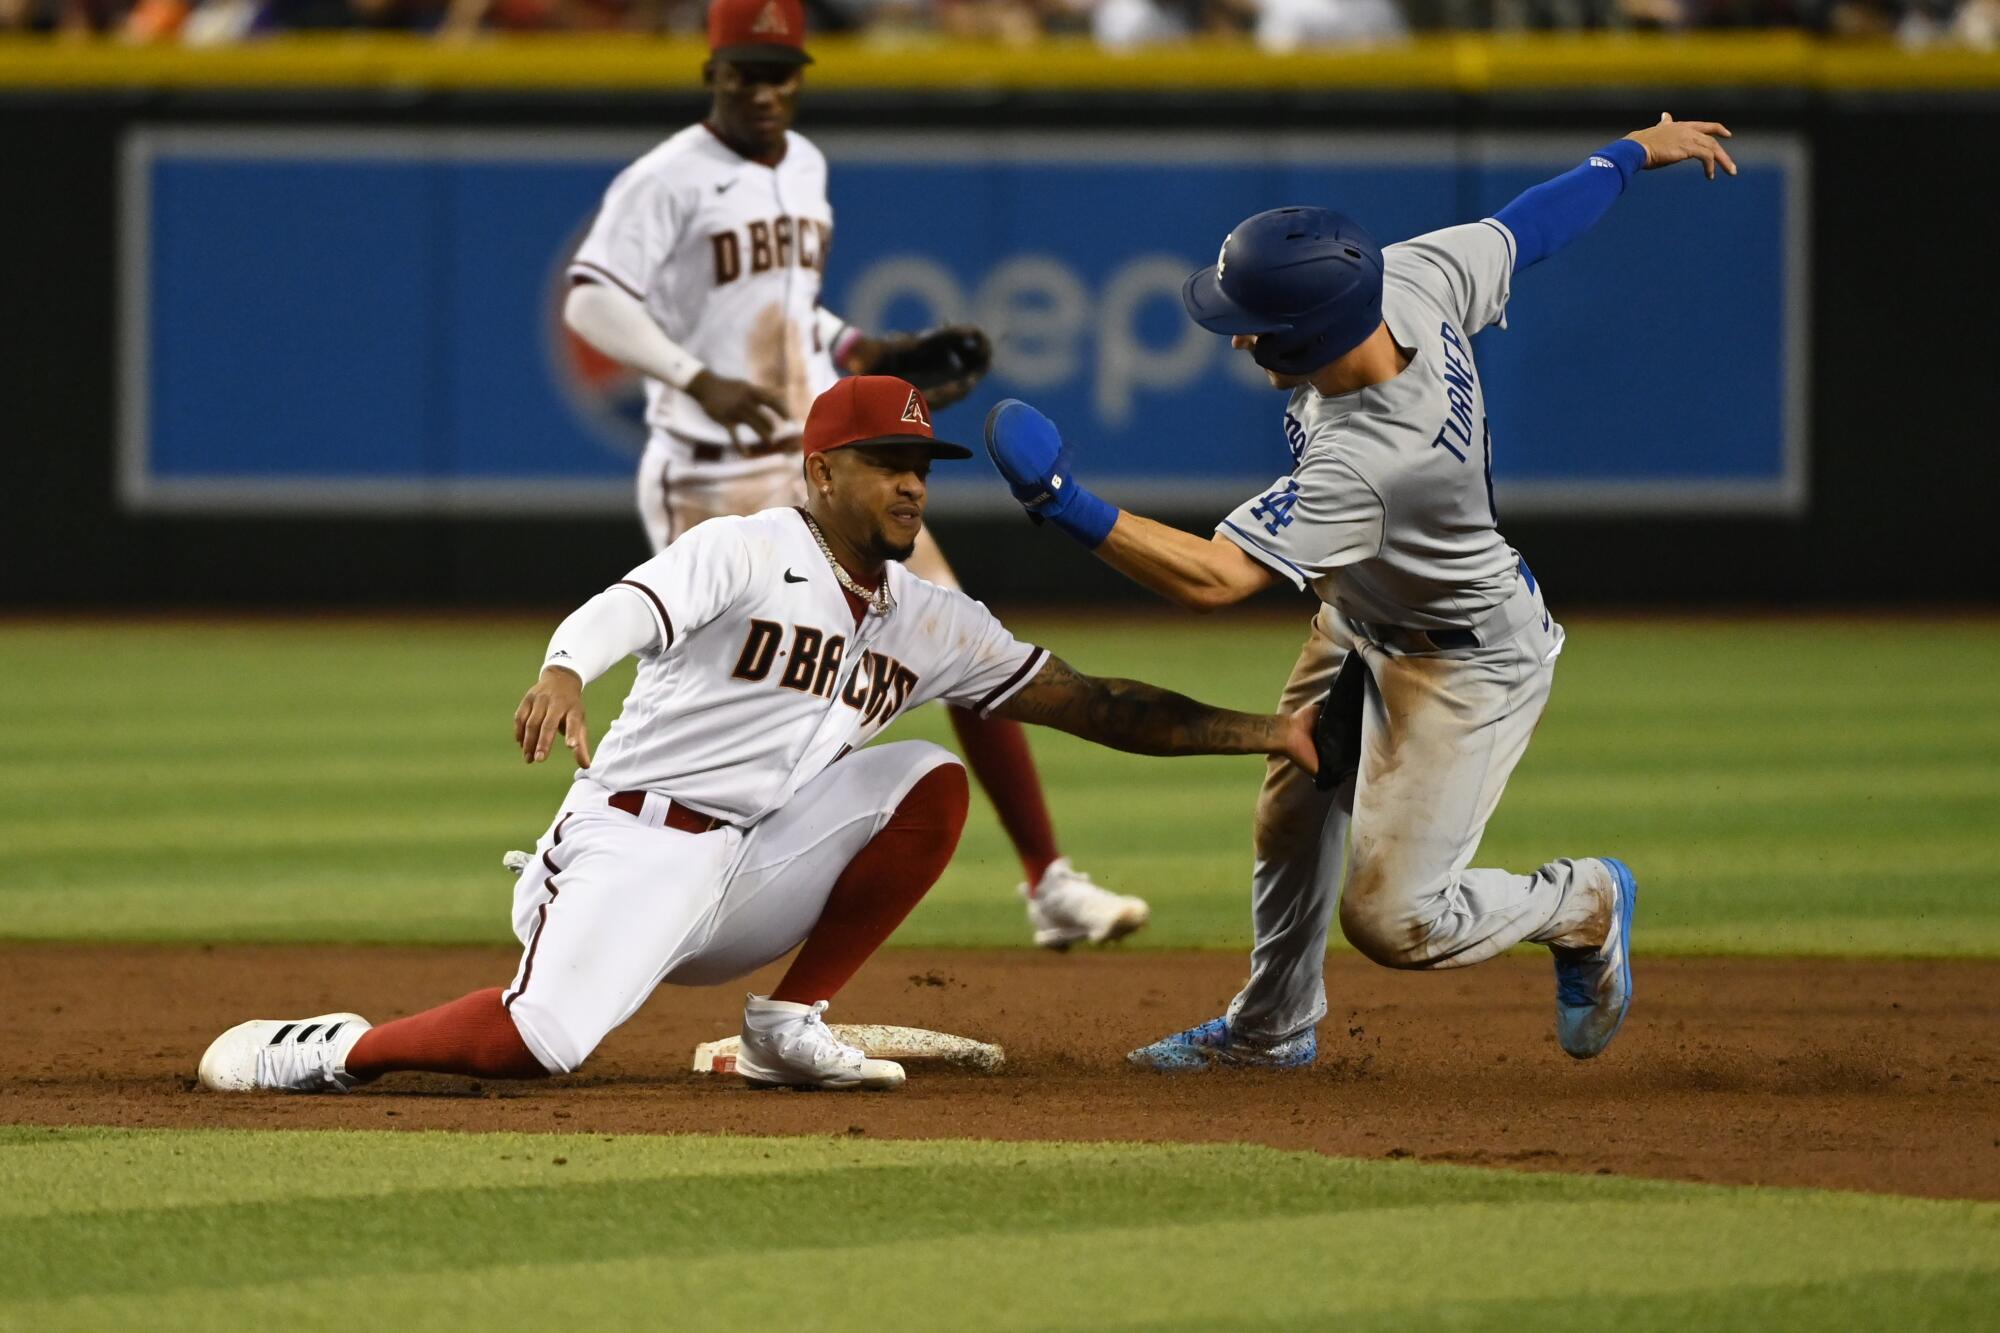 D-backs' David Peralta has big day at the plate in spring tie with Dodgers